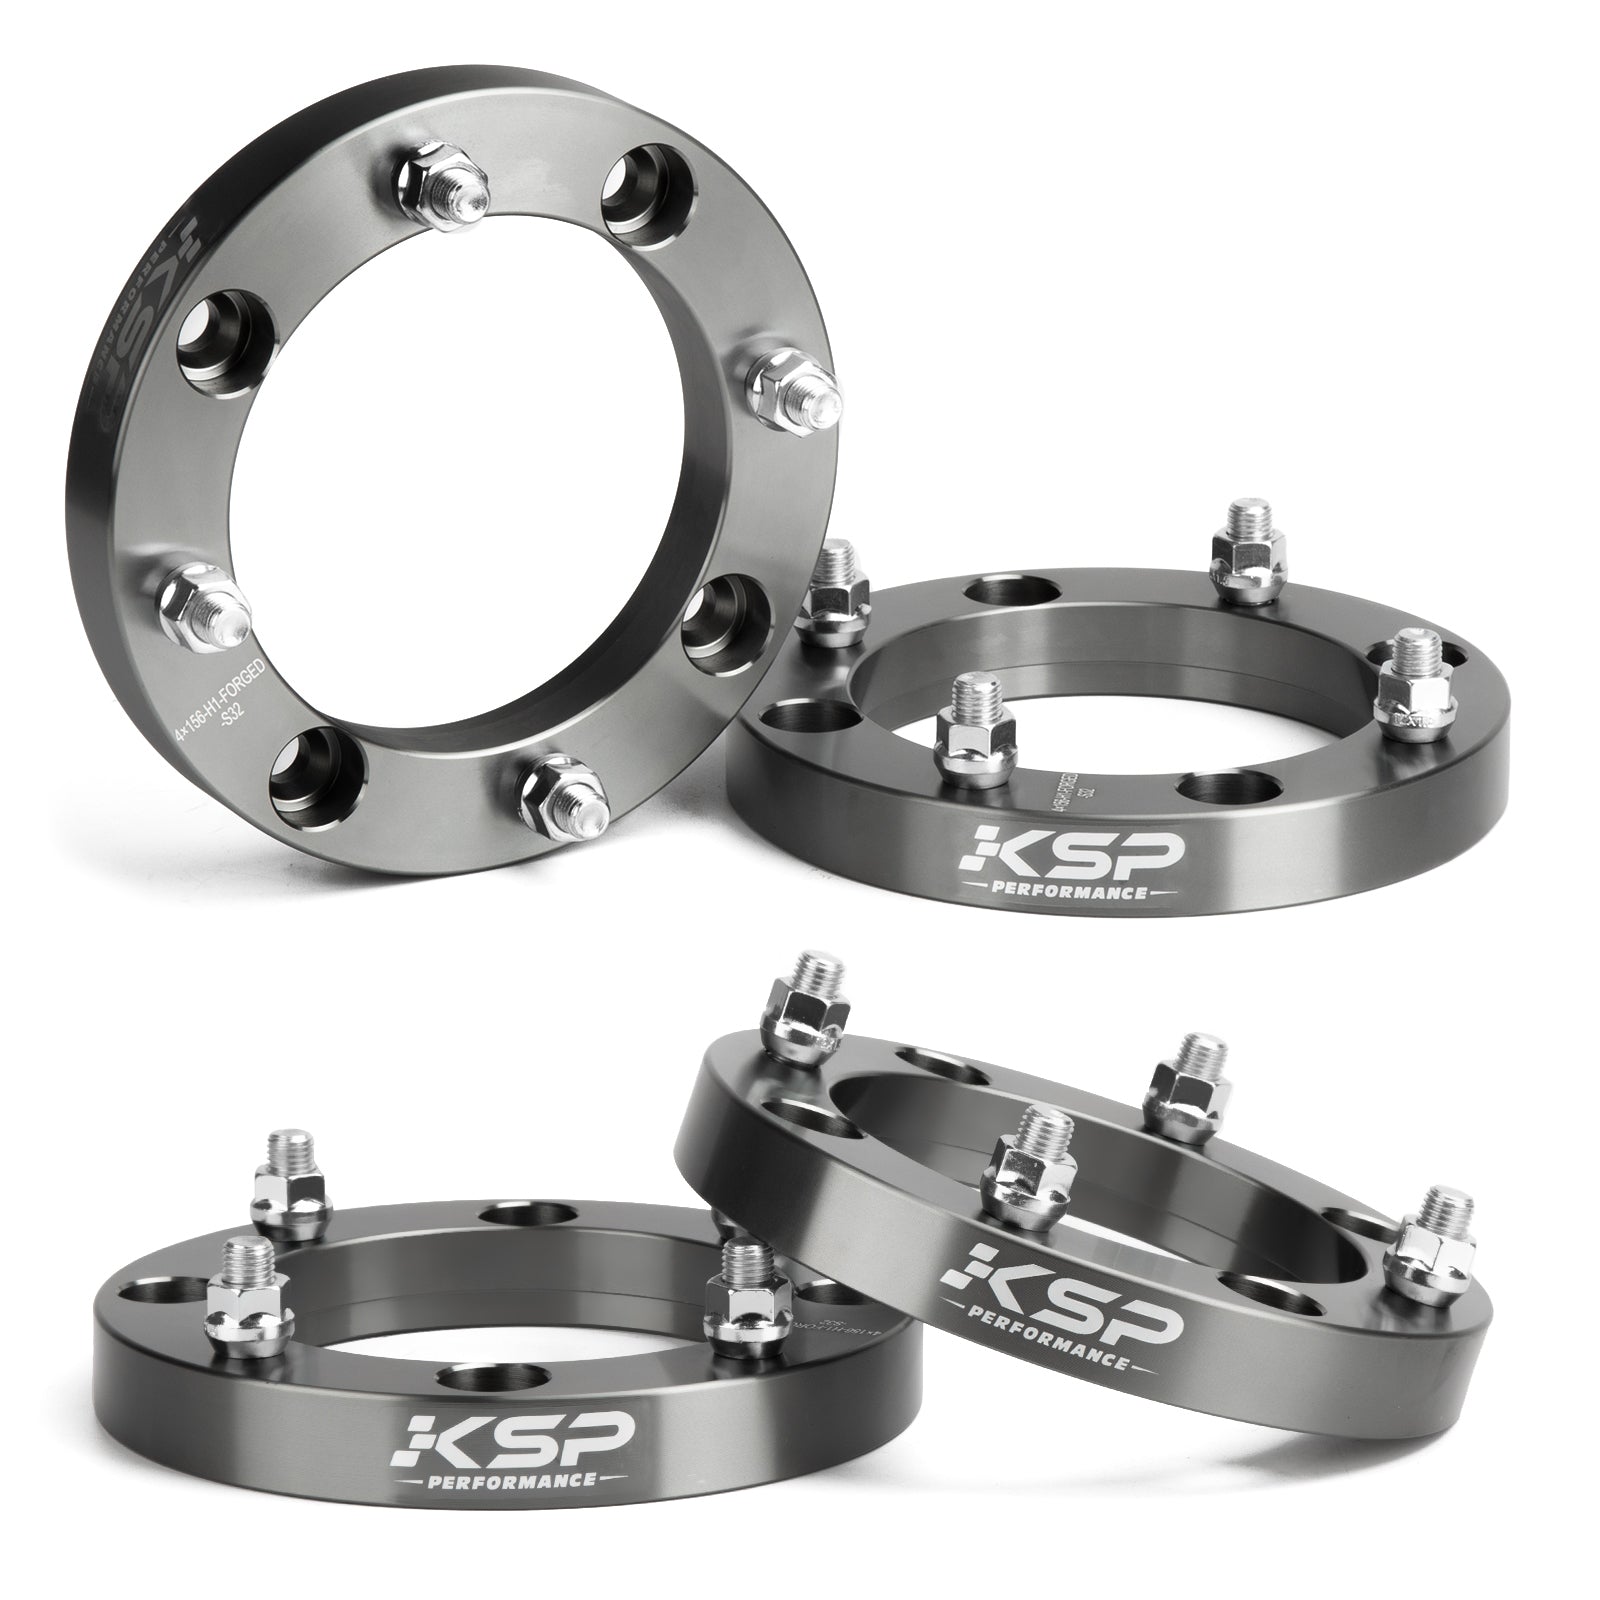 ATV Wheel Spacers  1Inch 4x156mm 12x1.5 Studs For 2013+ Polaris Ranger, 2014+ Polaris RZR XP 1000, 2015+ Polaris  RZR xccscss.